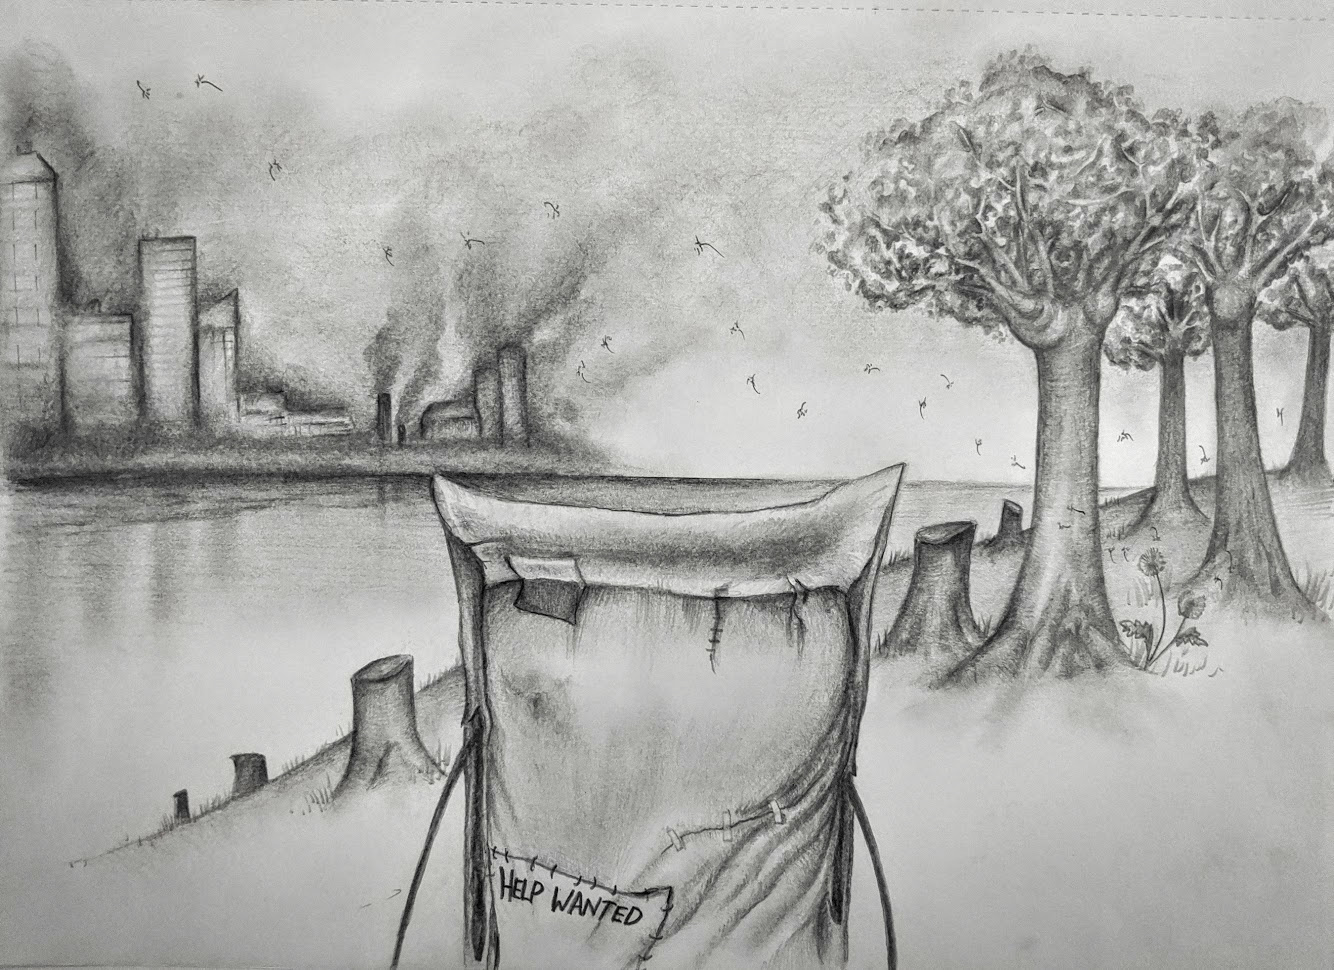 IMAGE: An anthropomorphic paper bag stands at the center of the picture facing away from the viewer, looking across a river. On the opposite side of the river, factory smokestacks at the edge of a city spew gases into the air. On the bag's side of the river there are four trees and five tree stumps. Two dandelion seedheads sprout from the ground, and seeds drift on the wind.